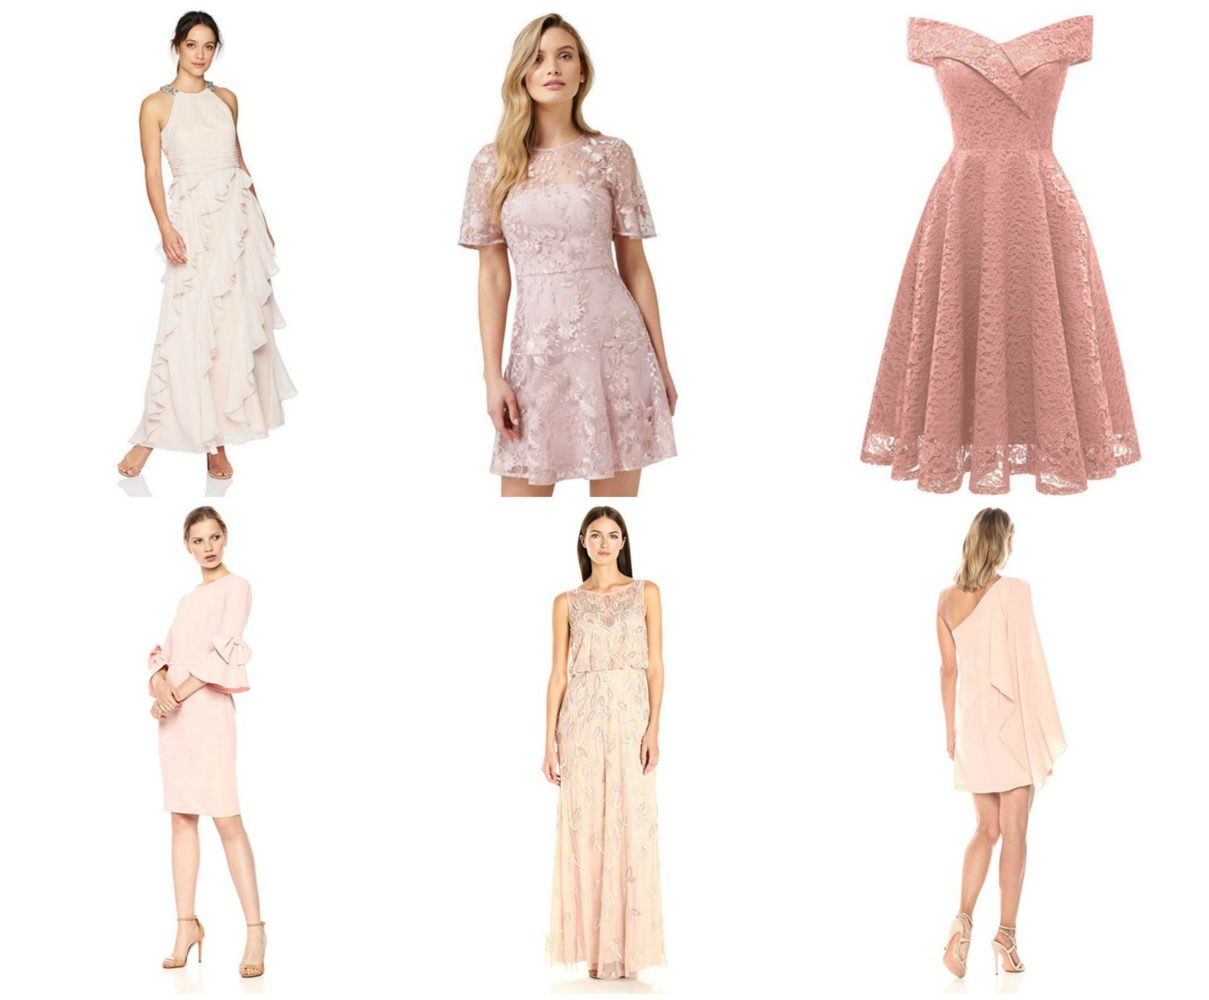 Love is in the air & you're looking for the perfect dress to wear – BUT it's the last minute. Grab your favorite romantic blush dresses with Amazon Prime!